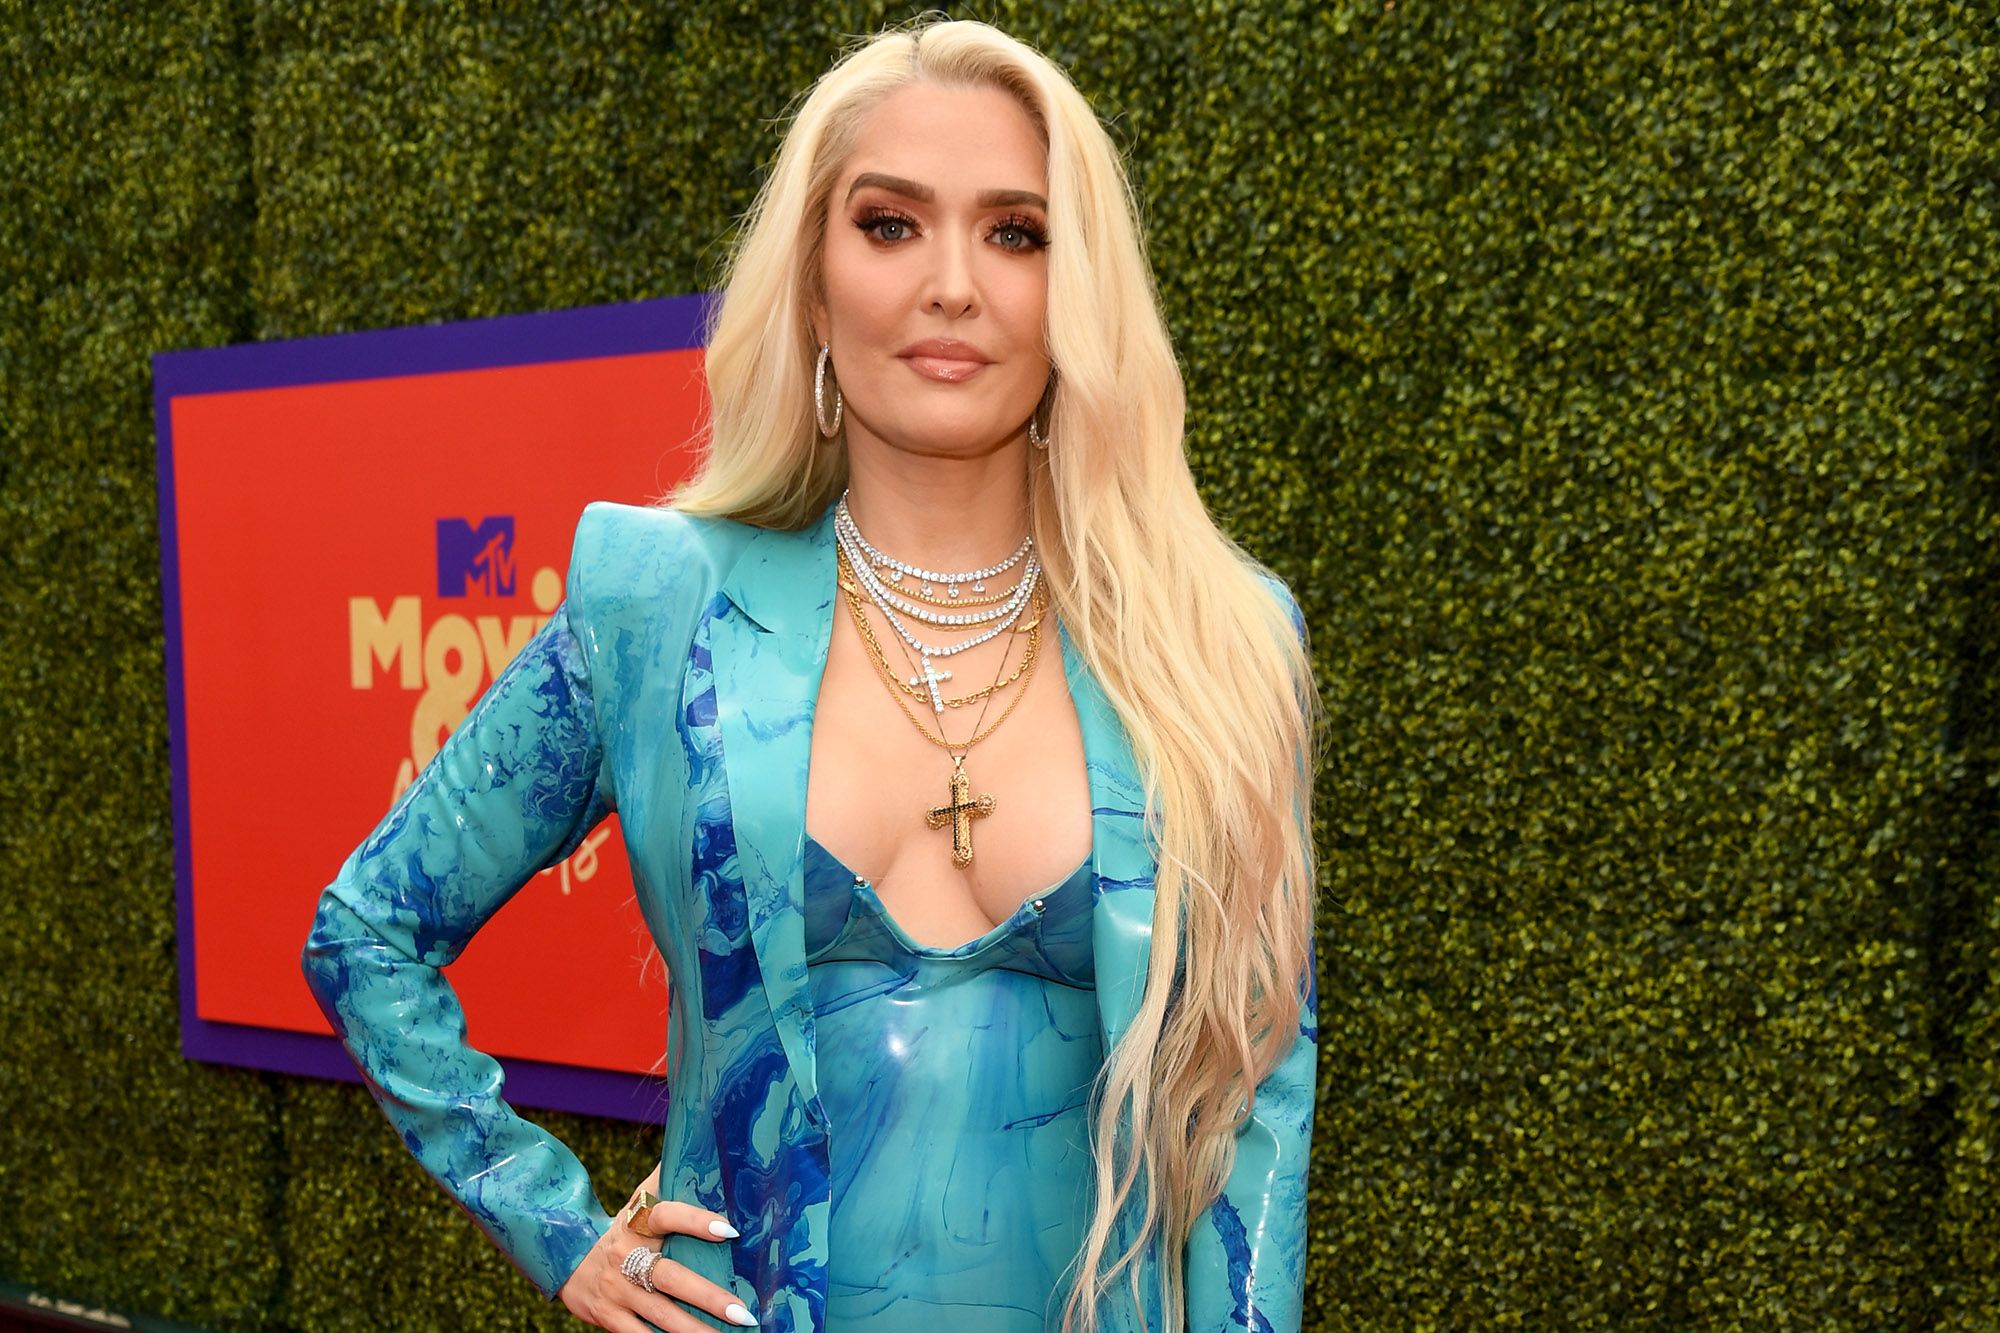 Real Housewives of Beverly Hills Erika Jayne Legal Woes Against Tom Girardi And Jen Shah Removes Meme About Her